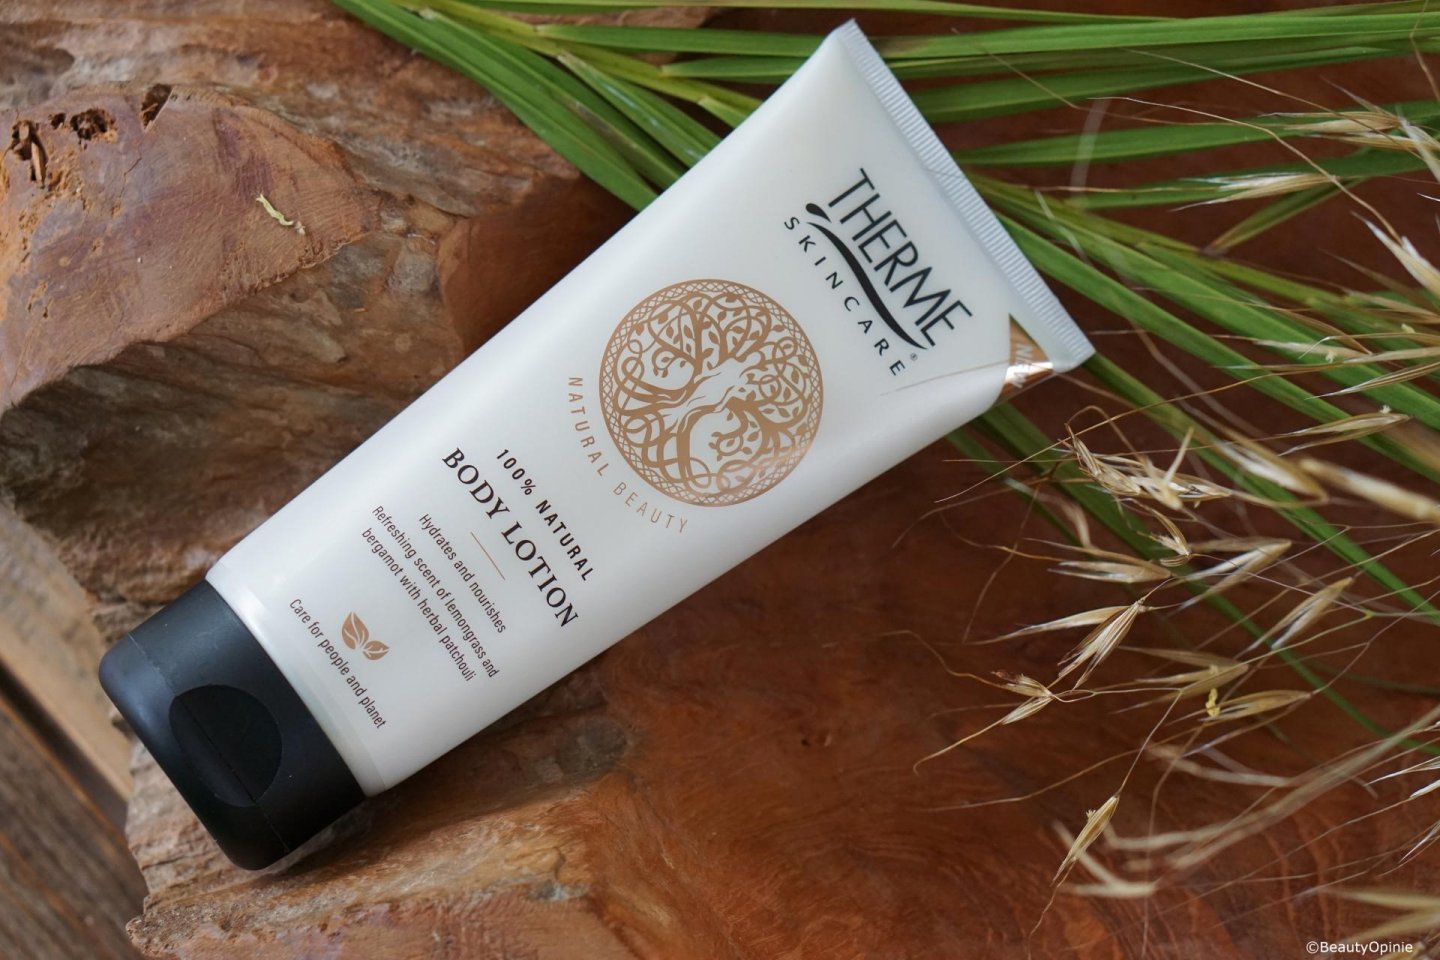 Therme Natural Beauty bodylotion review